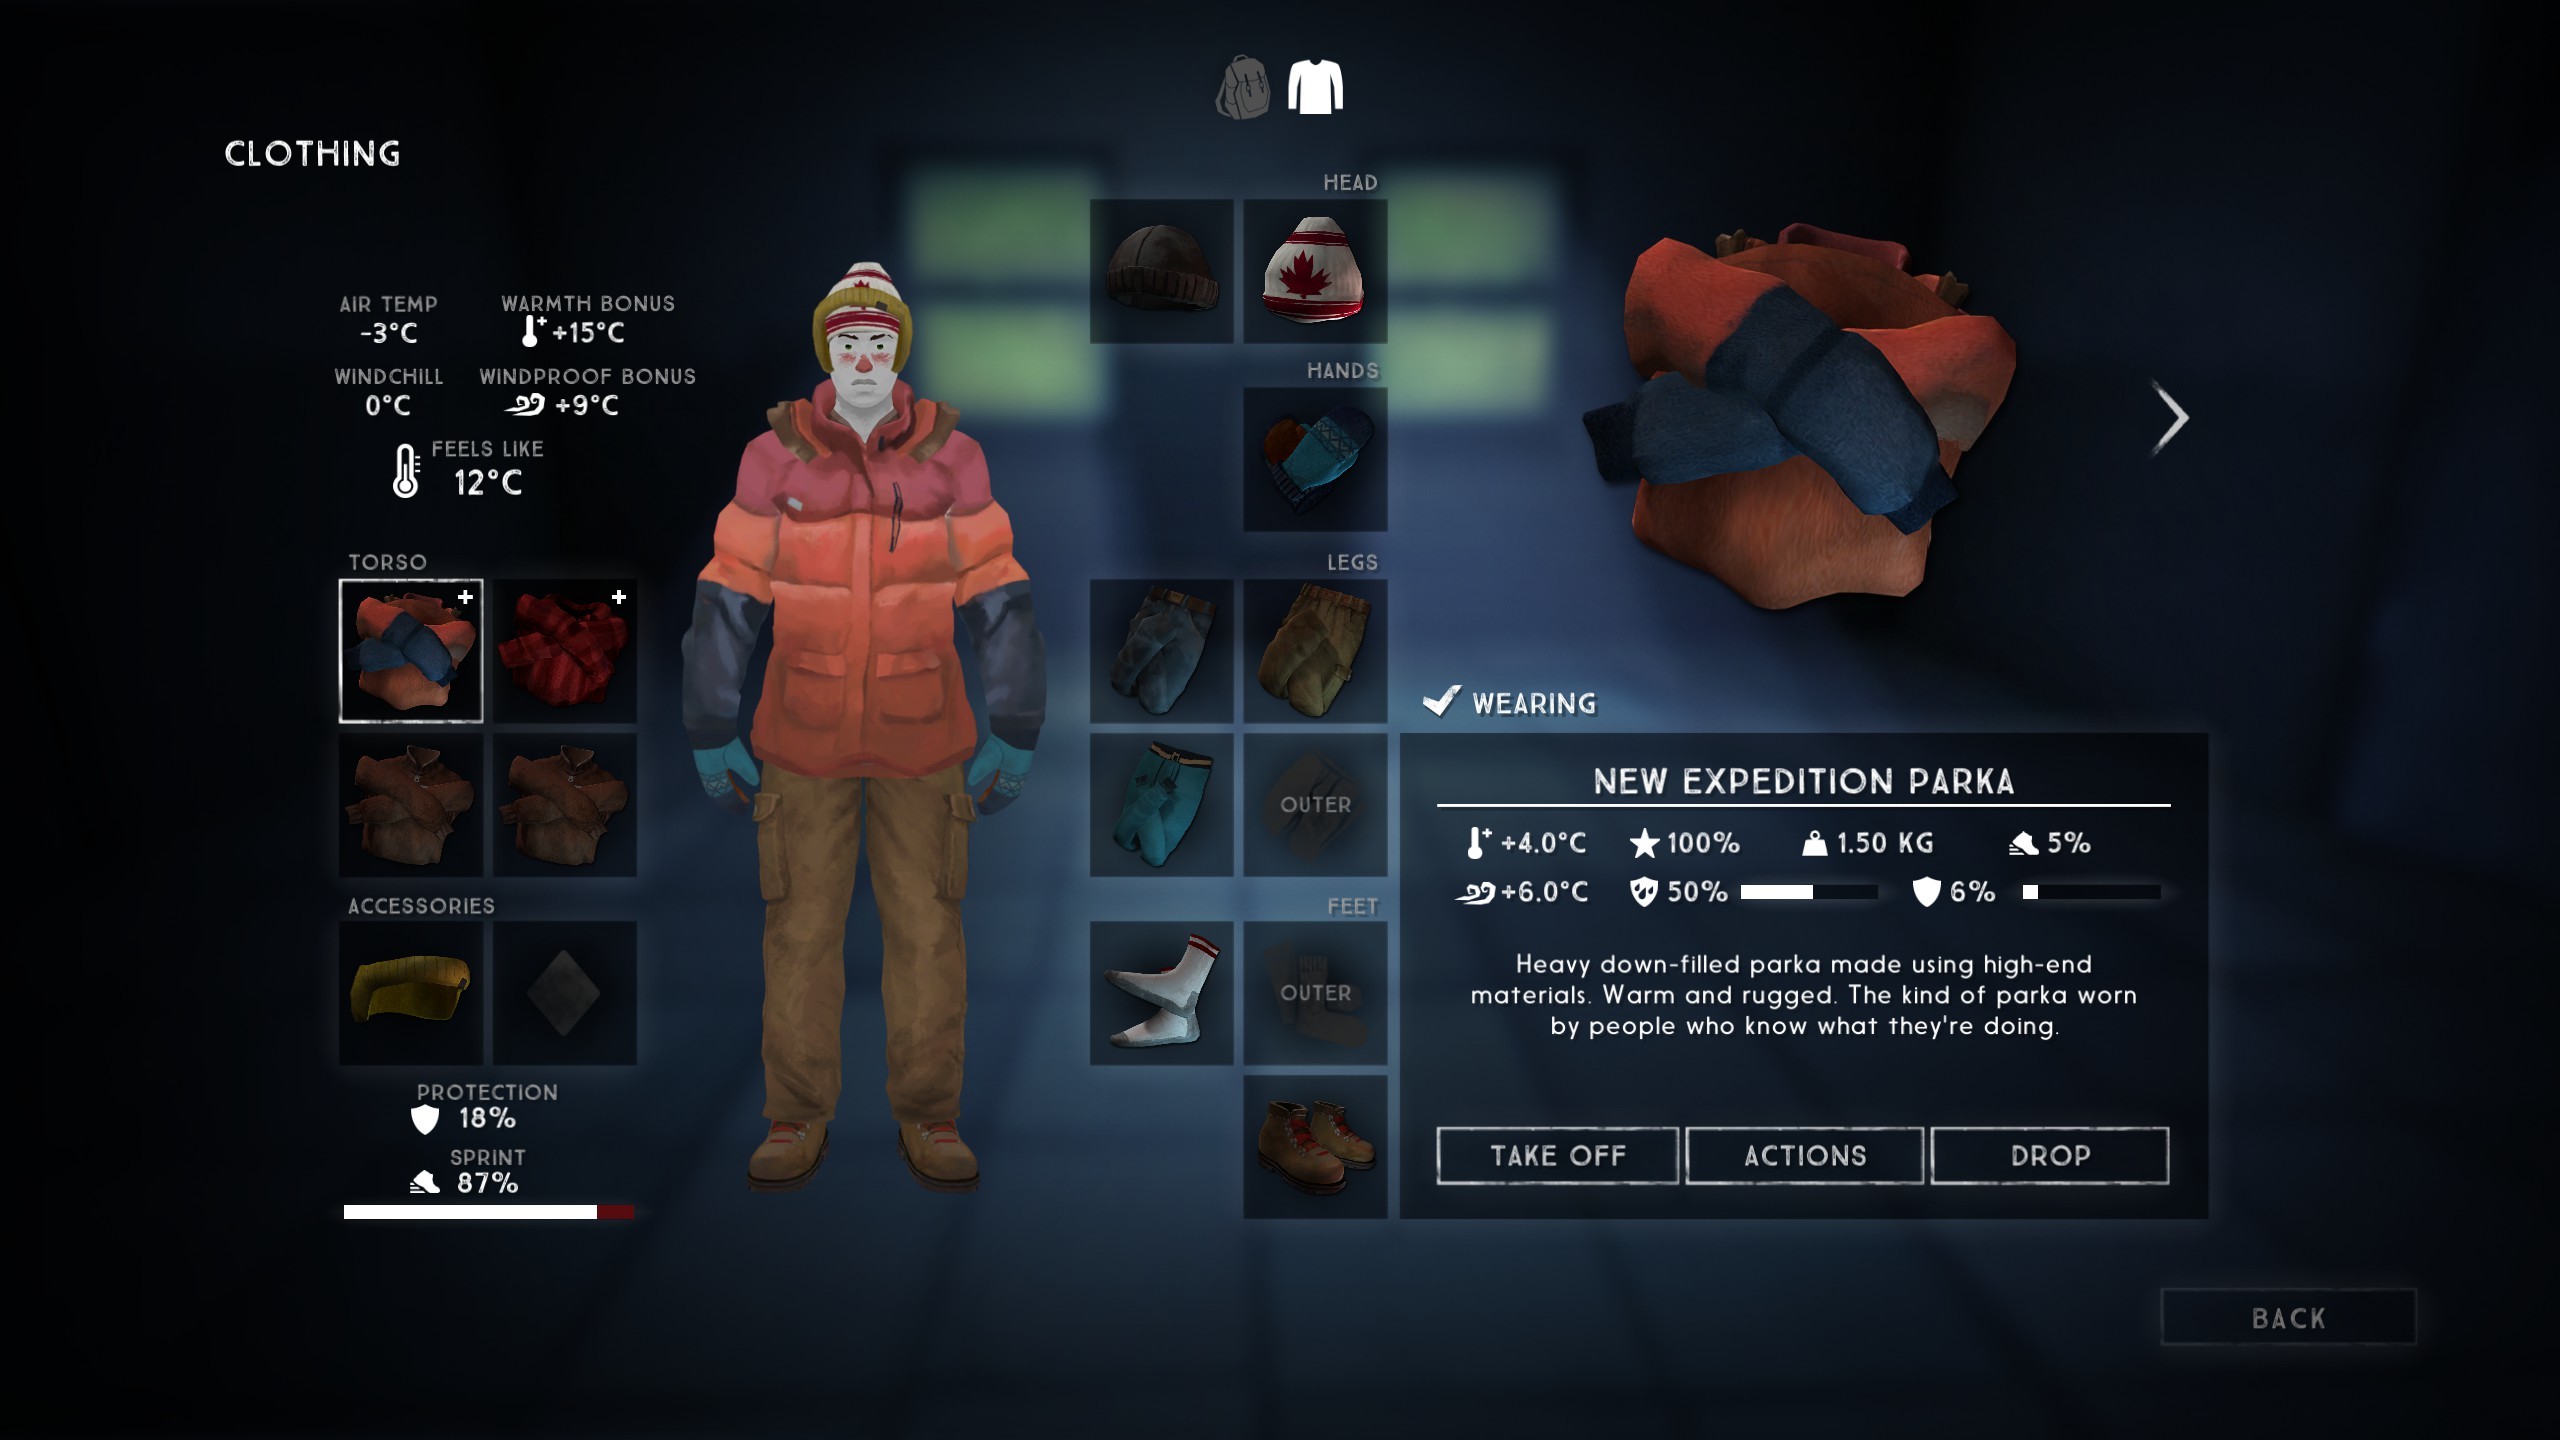 2560x1440 The Expedition Parka is one of the best clothing items in The Long Dark.